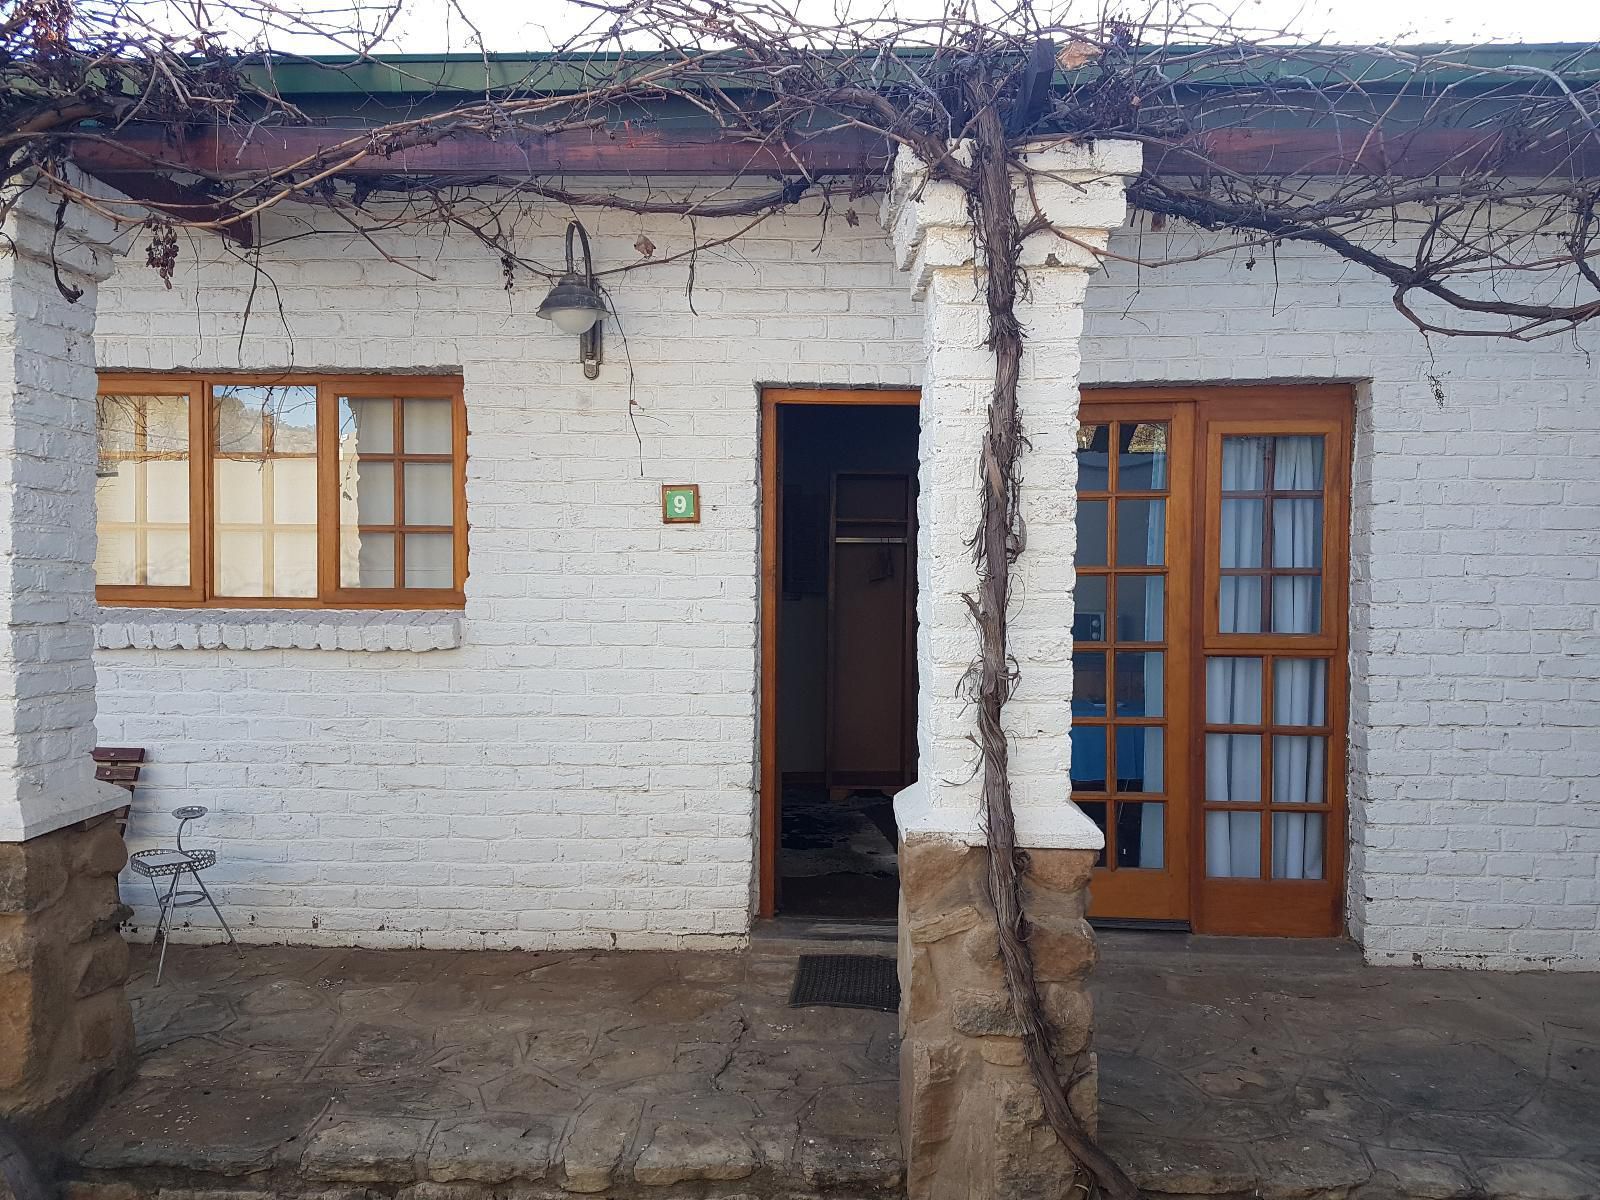 Crane Cottage Colesberg Northern Cape South Africa House, Building, Architecture, Window